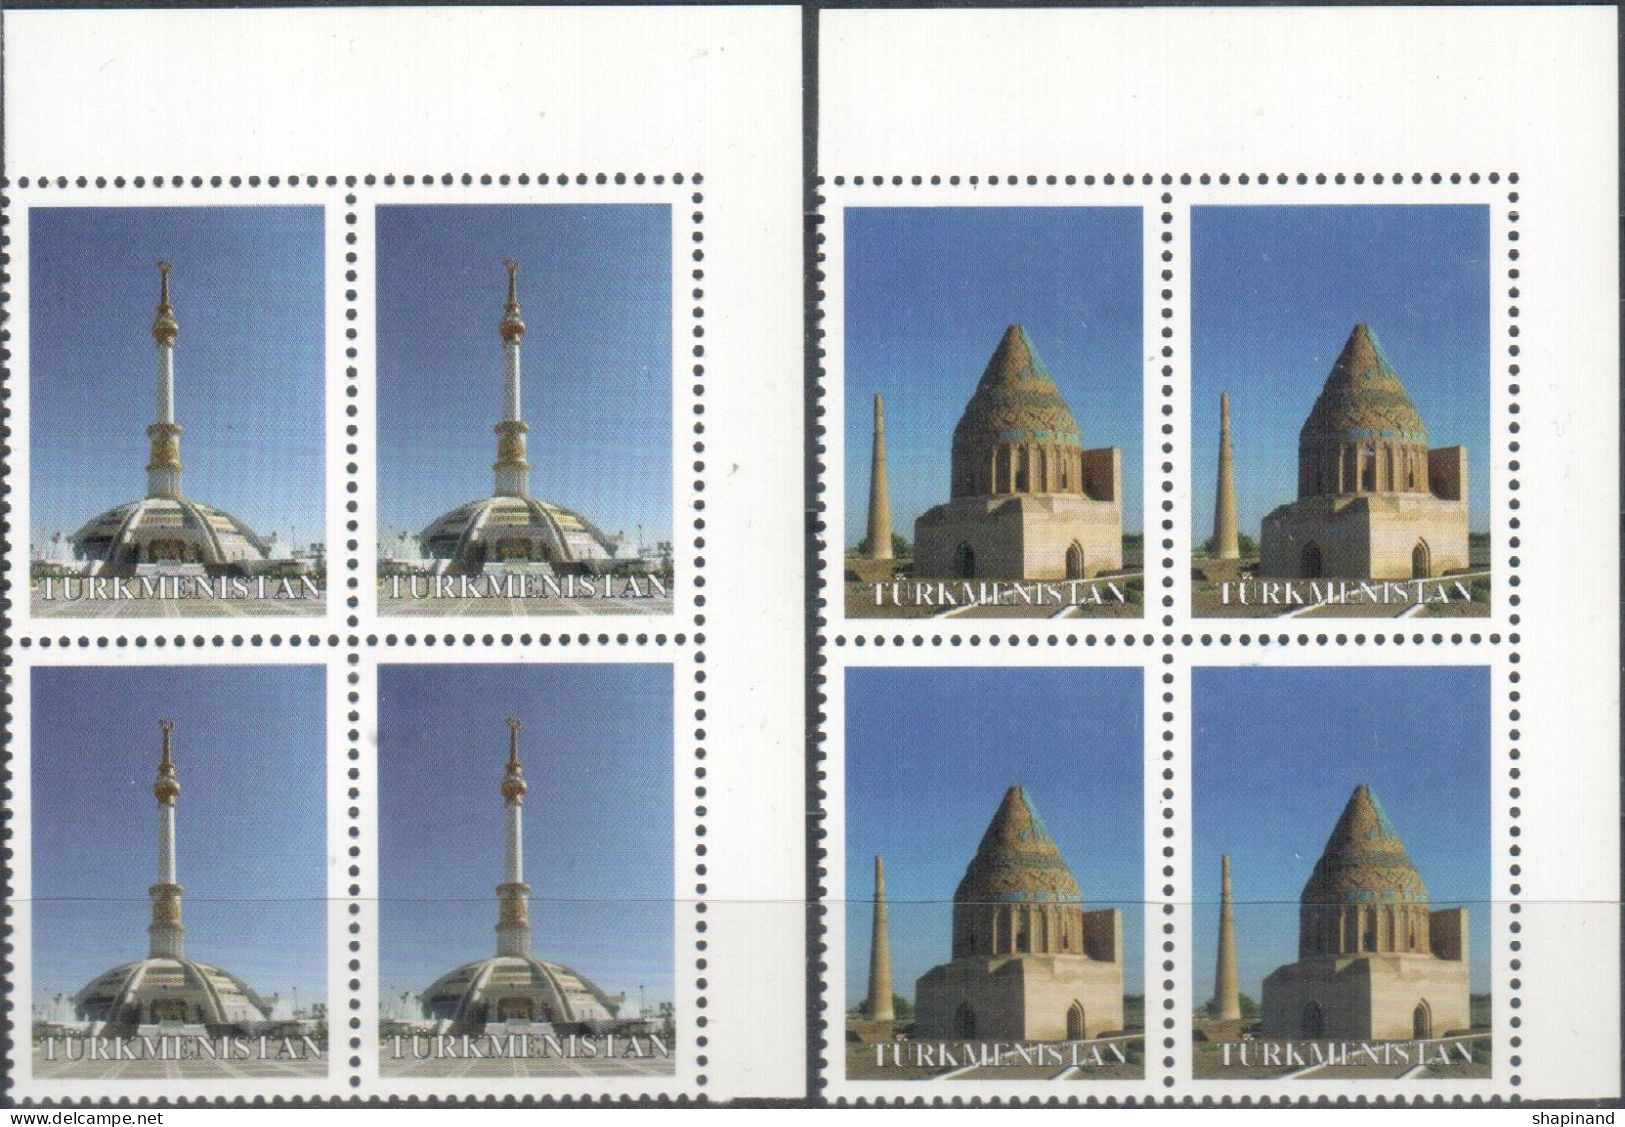 Turkmenistan 2014 "Architecture Of Ashgabat" (A Very Rare Stamps Without A Face Value) 2 Bl Of 4v Quality100% - Turkmenistan